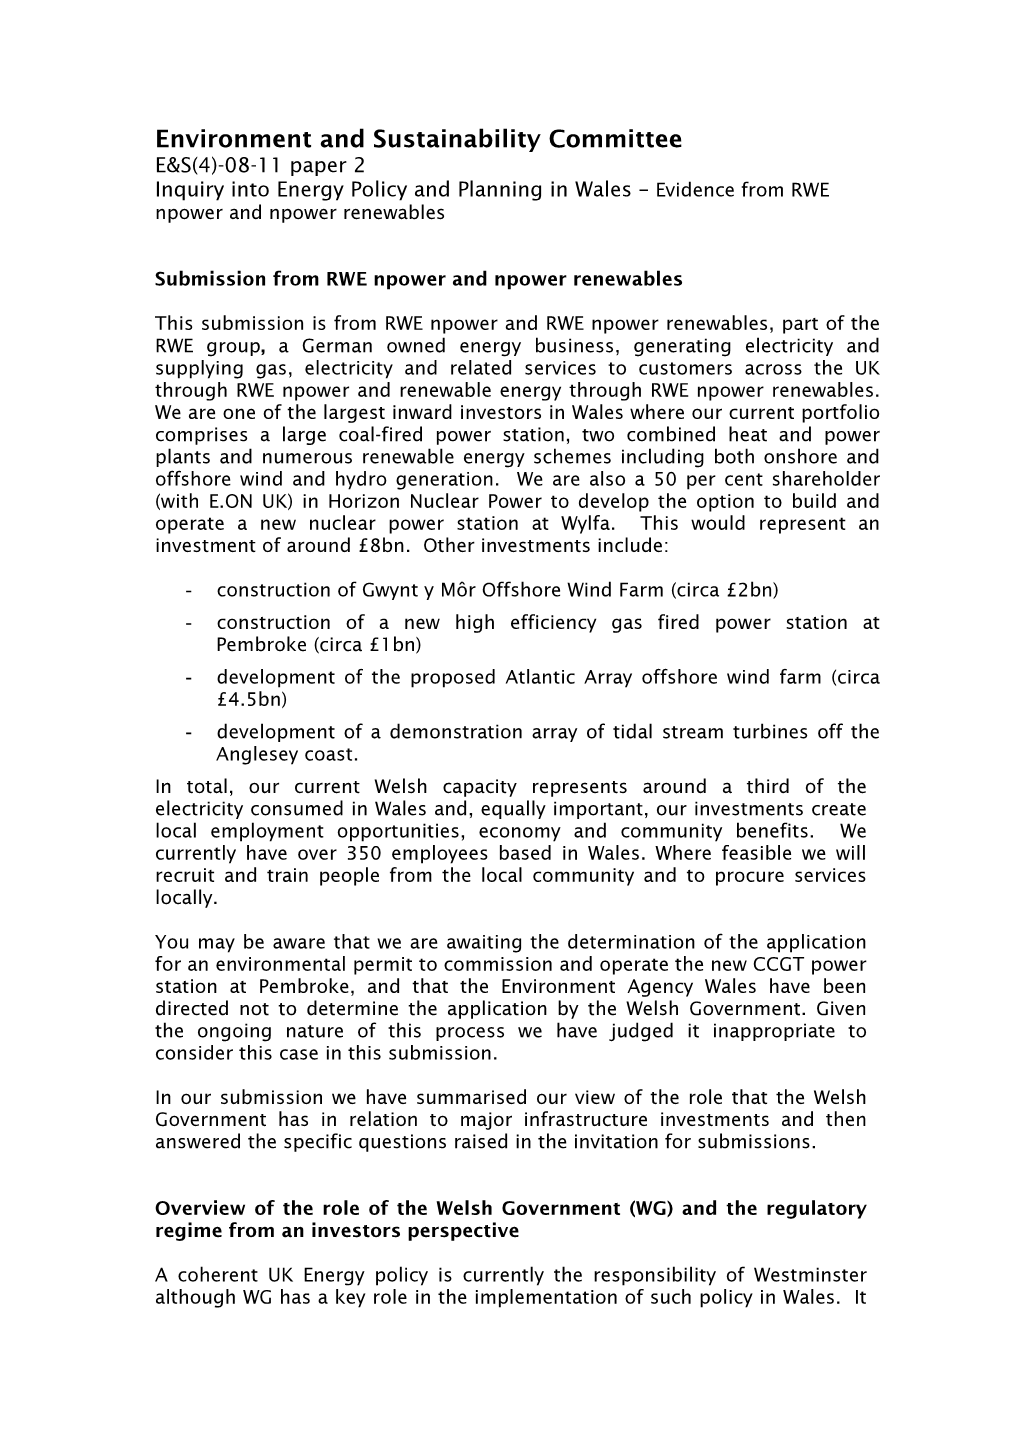 Environment and Sustainability Committee E&S(4)-08-11 Paper 2 Inquiry Into Energy Policy and Planning in Wales – Evidence from RWE Npower and Npower Renewables